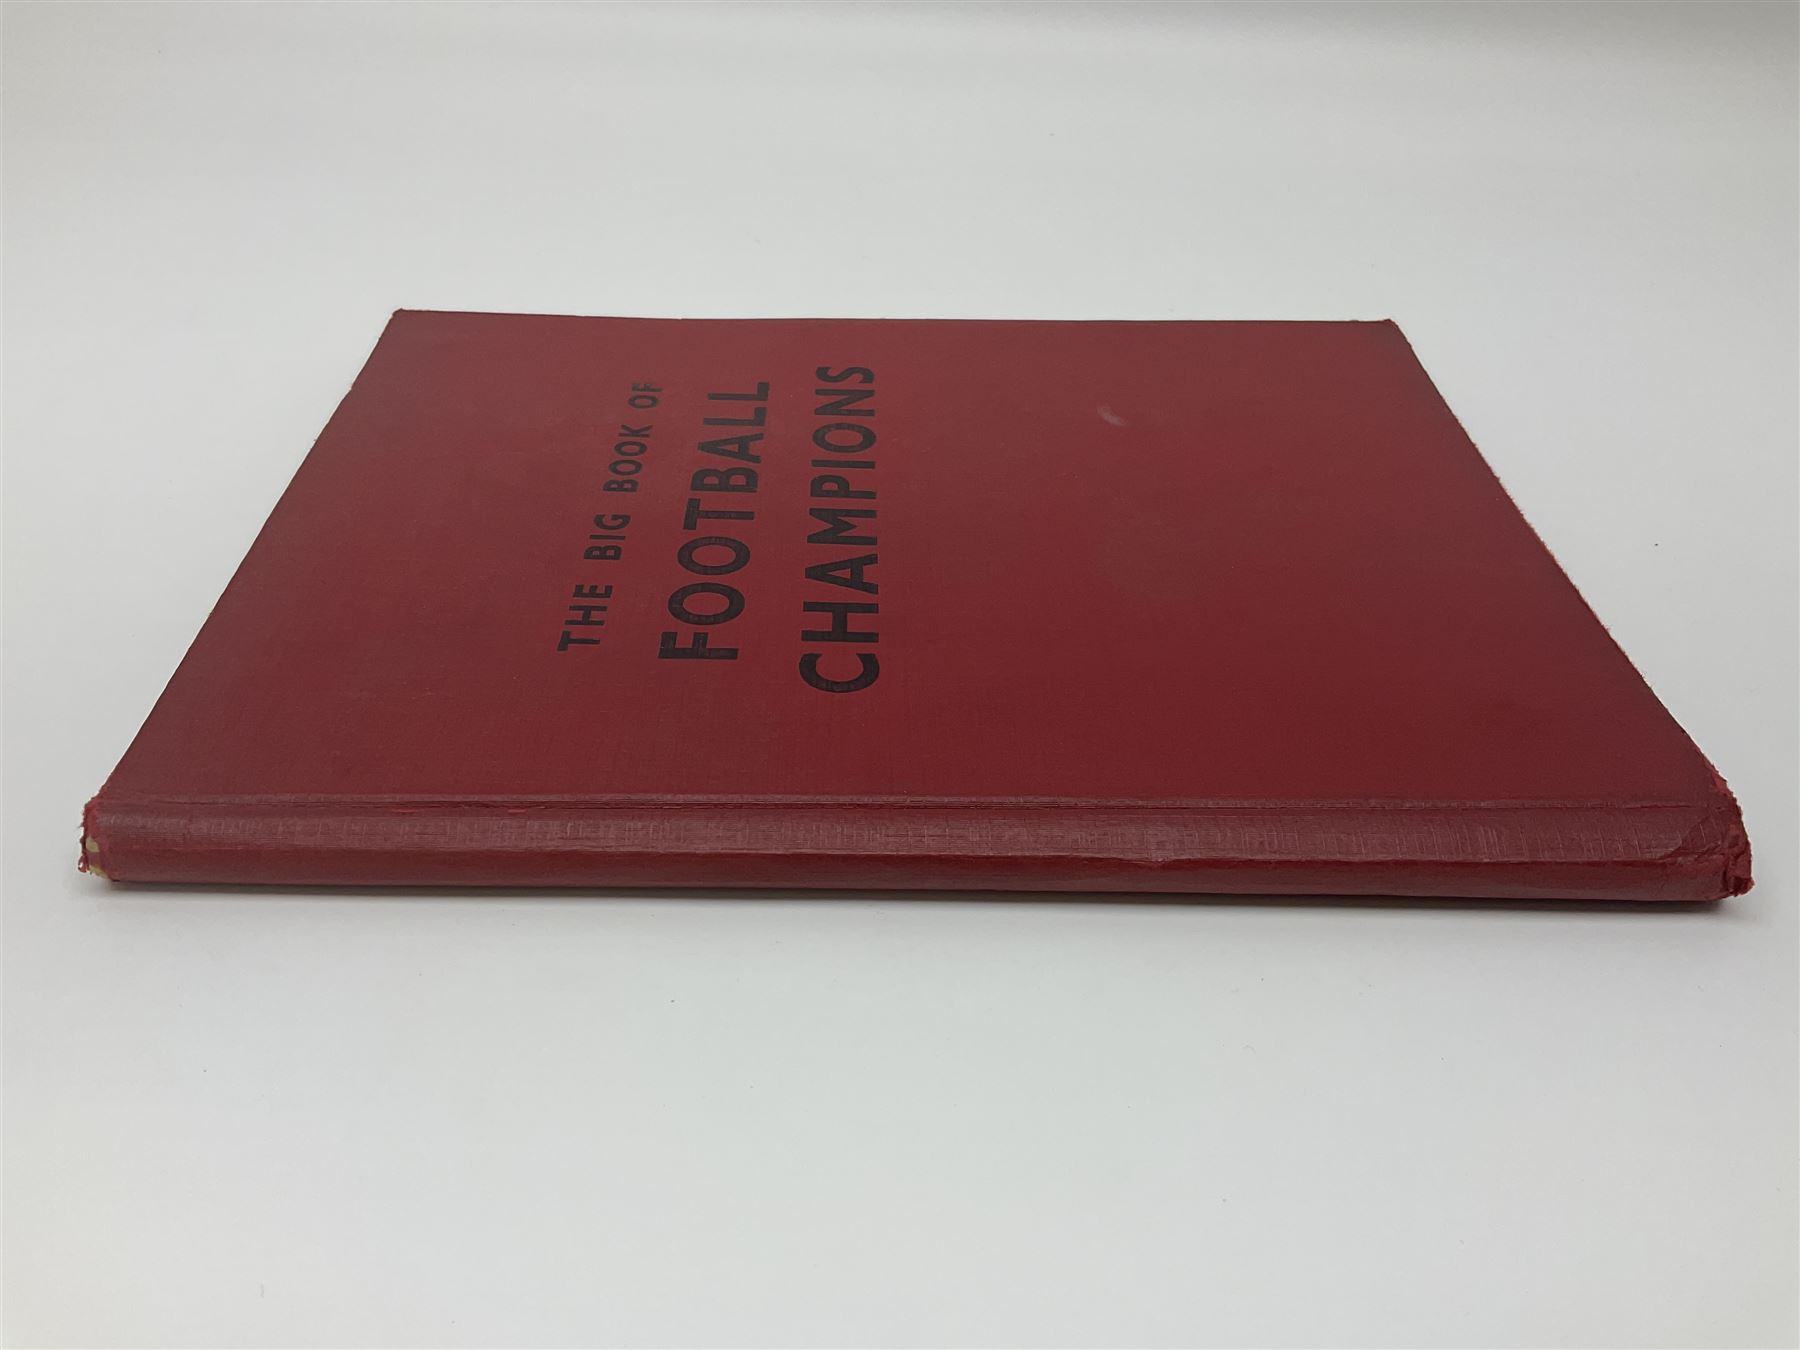 The Big Book of Football Champions by LTA Robinson Ltd - Image 7 of 7